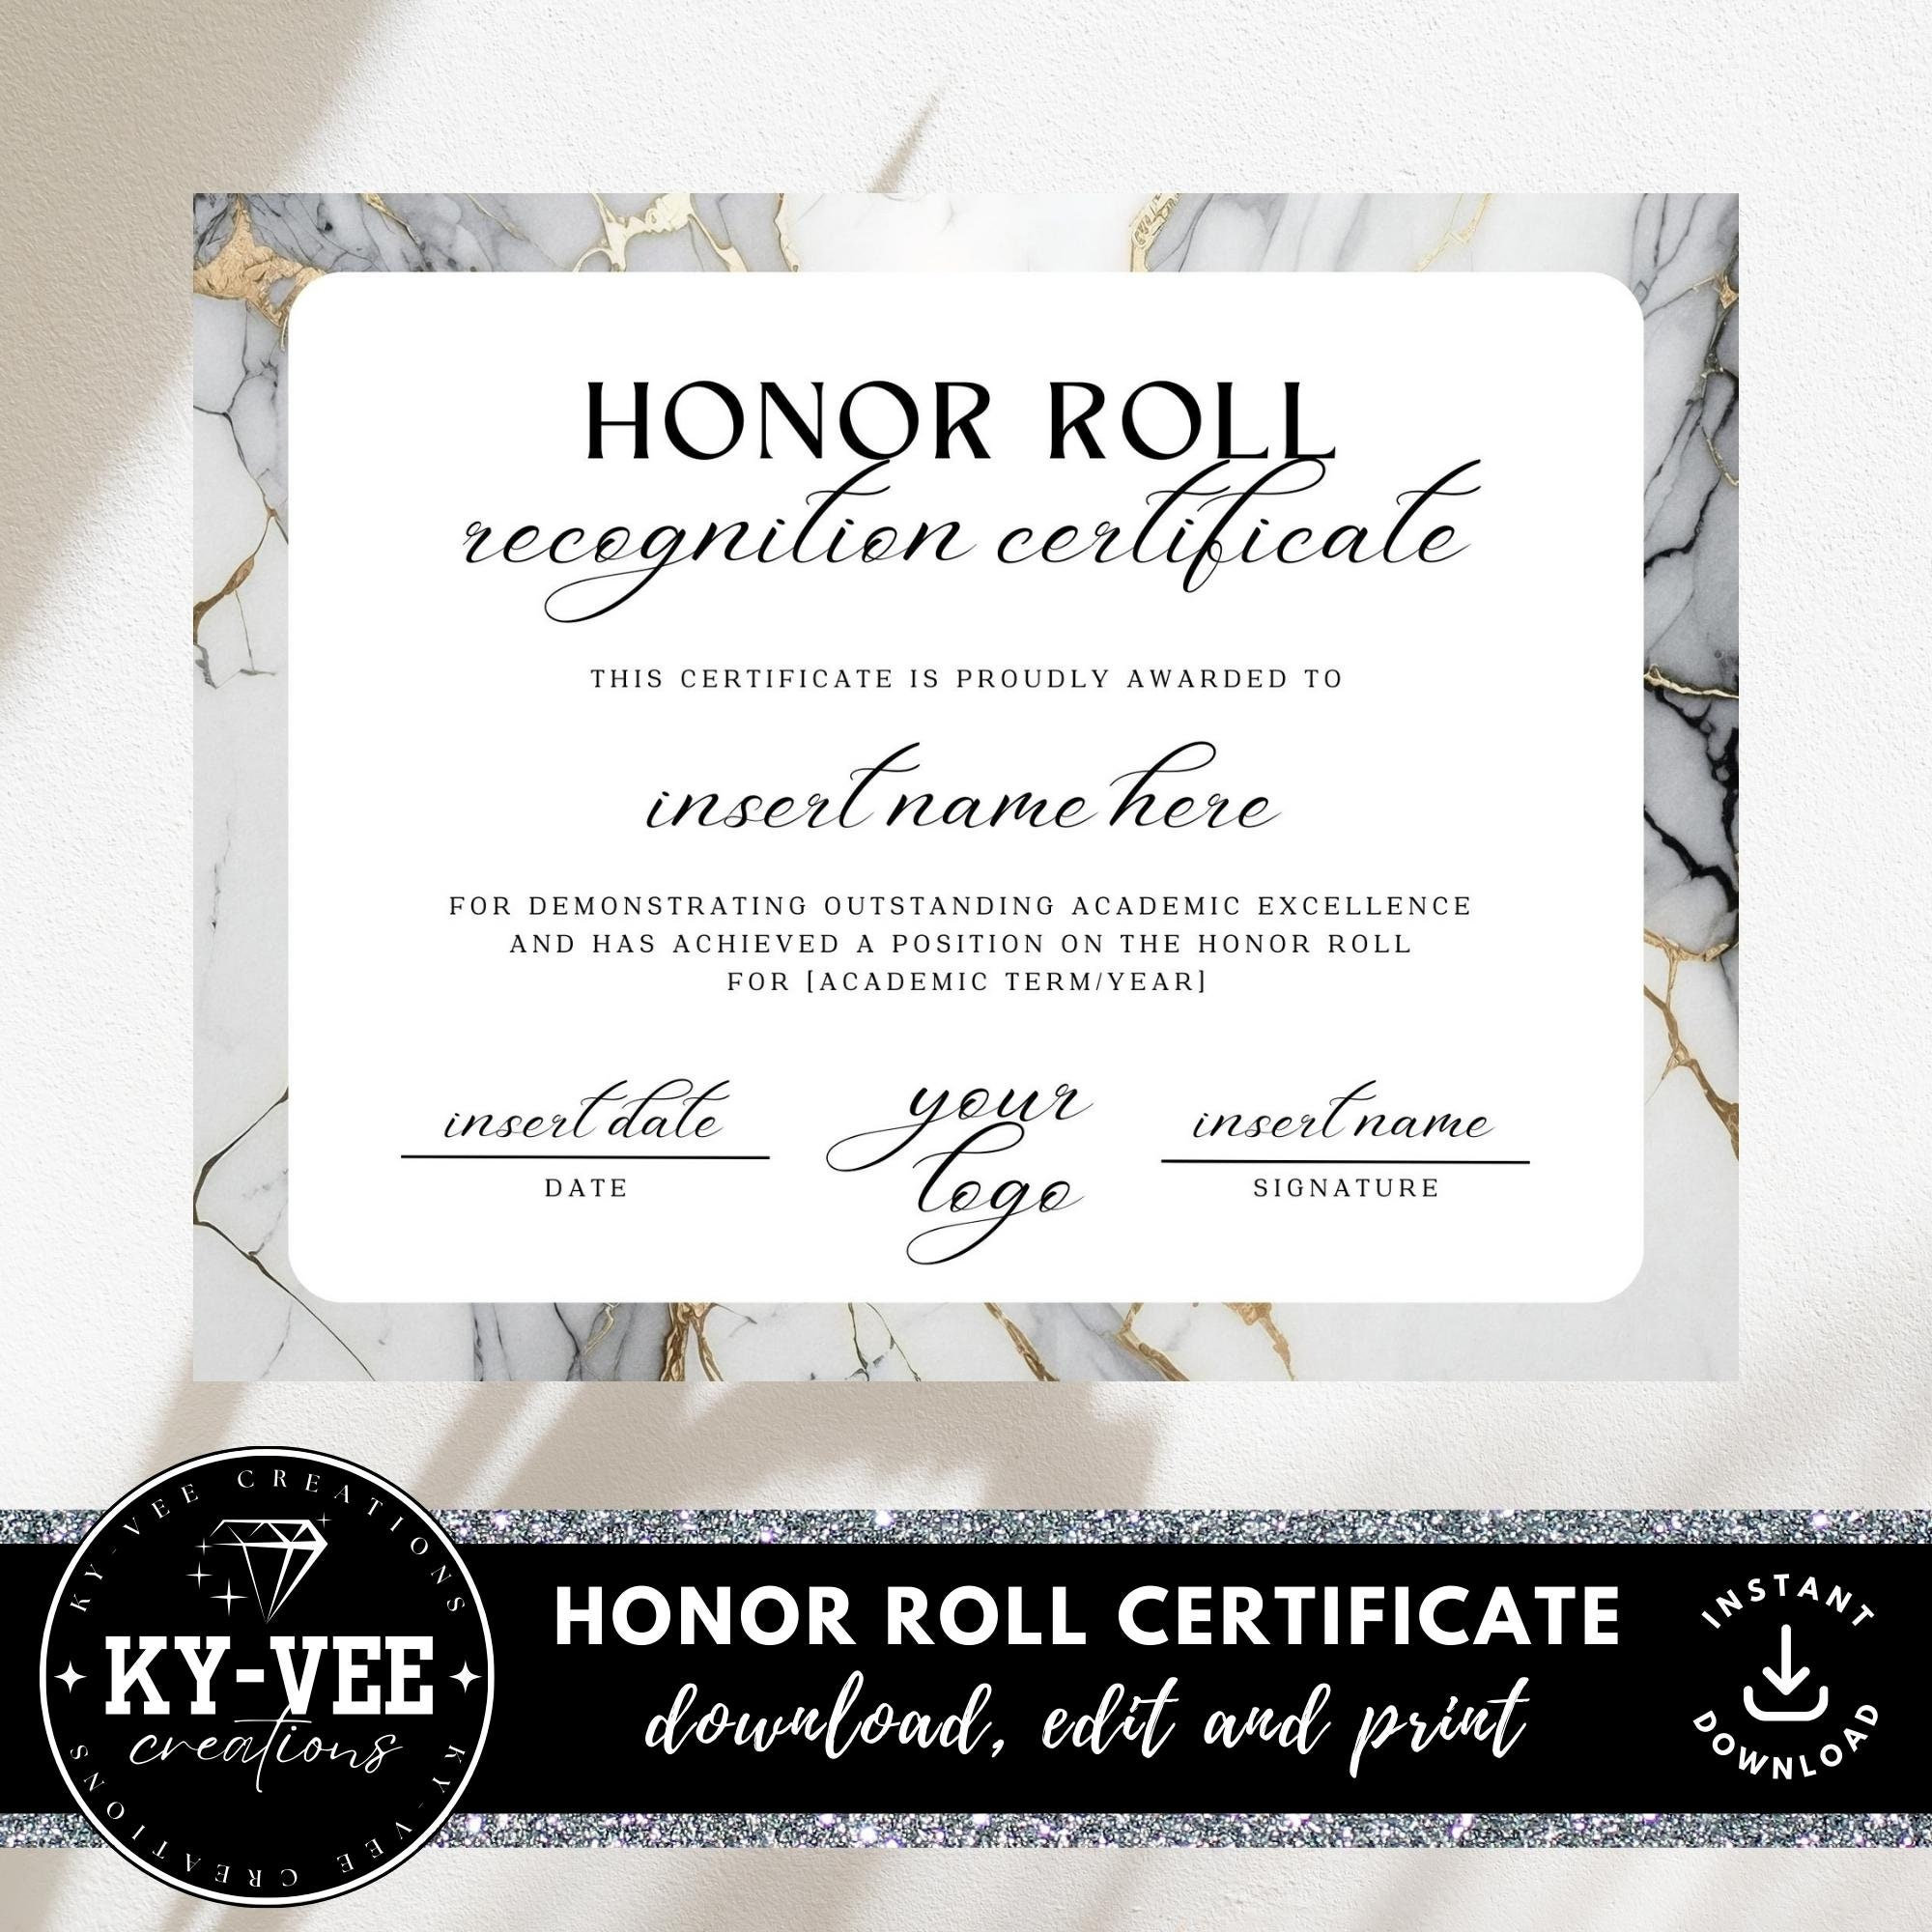 50-Sheets Printable Award Certificate Paper with Silver Foil Border for  Graduation Diploma, Achievement Awards, Blank Certificates, Offices